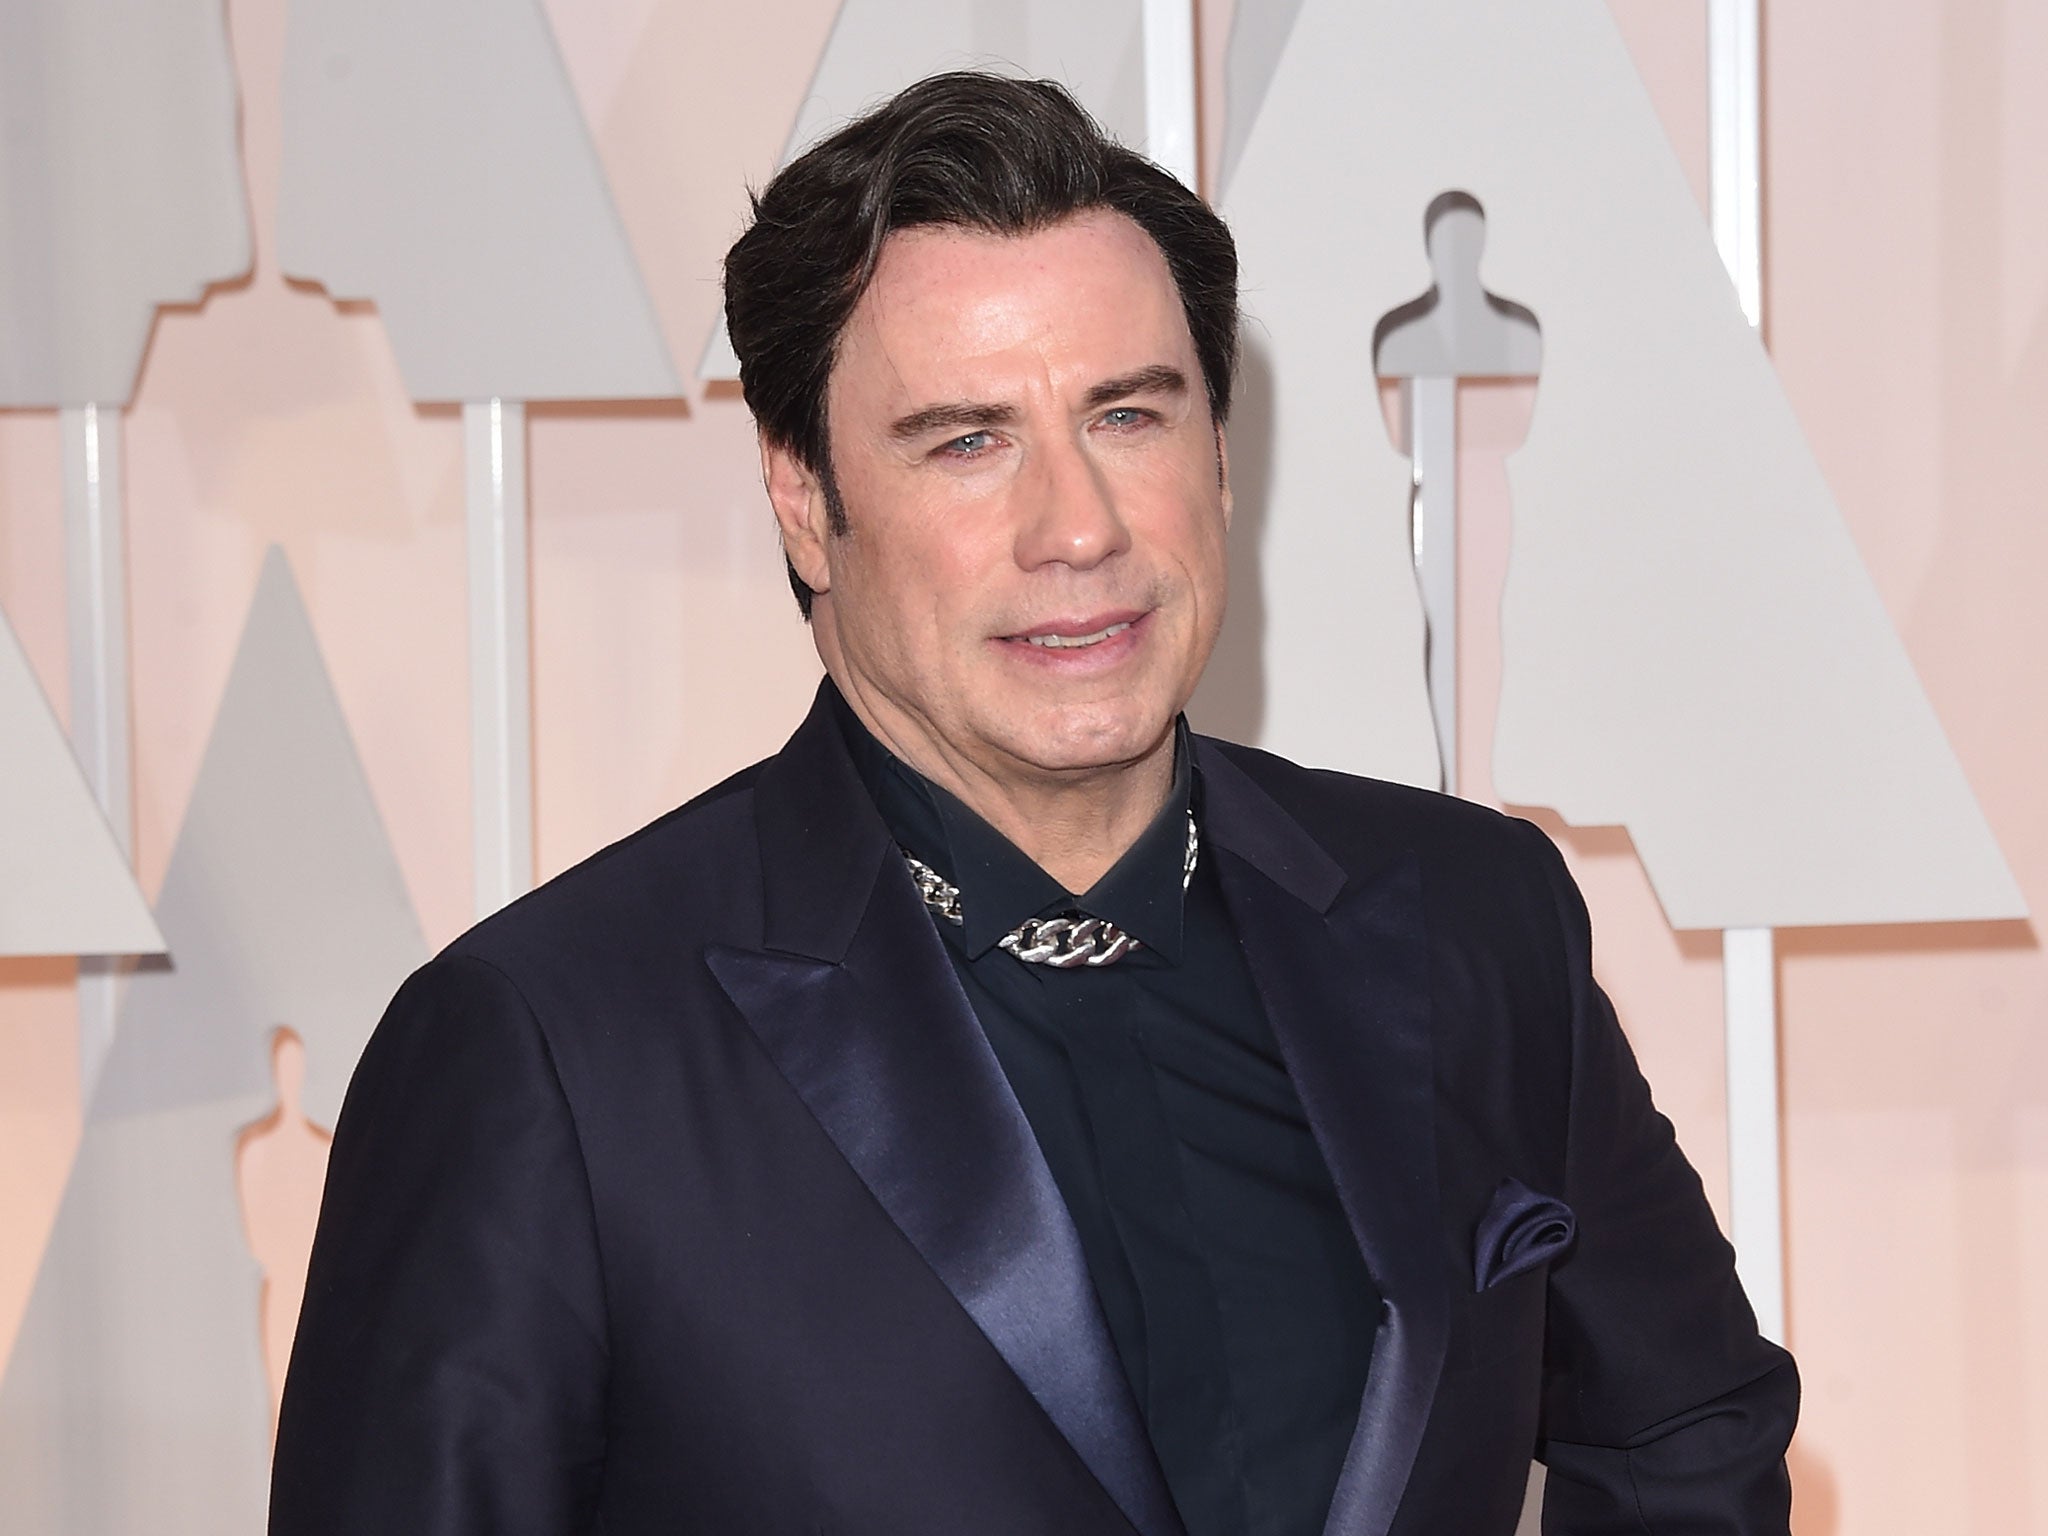 John Travolta dismisses new Scientology documentary by former member Leah Remini The Independent The Independent pic